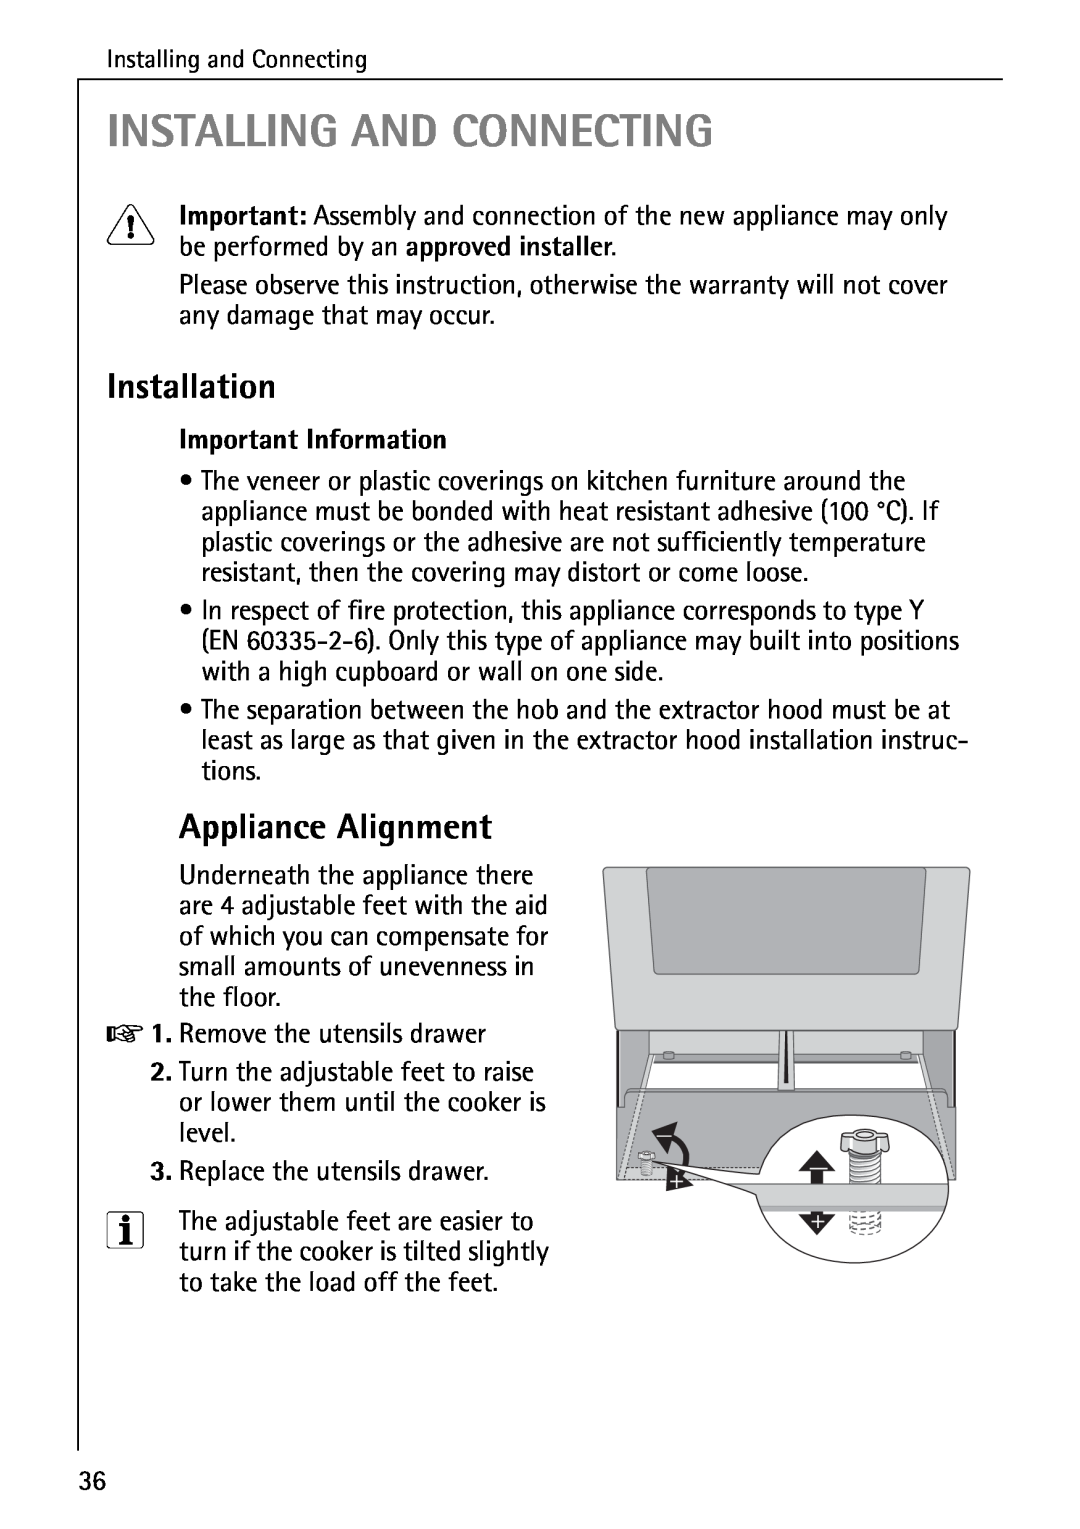 AEG 2003 F operating instructions Installing And Connecting, Installation, Appliance Alignment, Important Information 